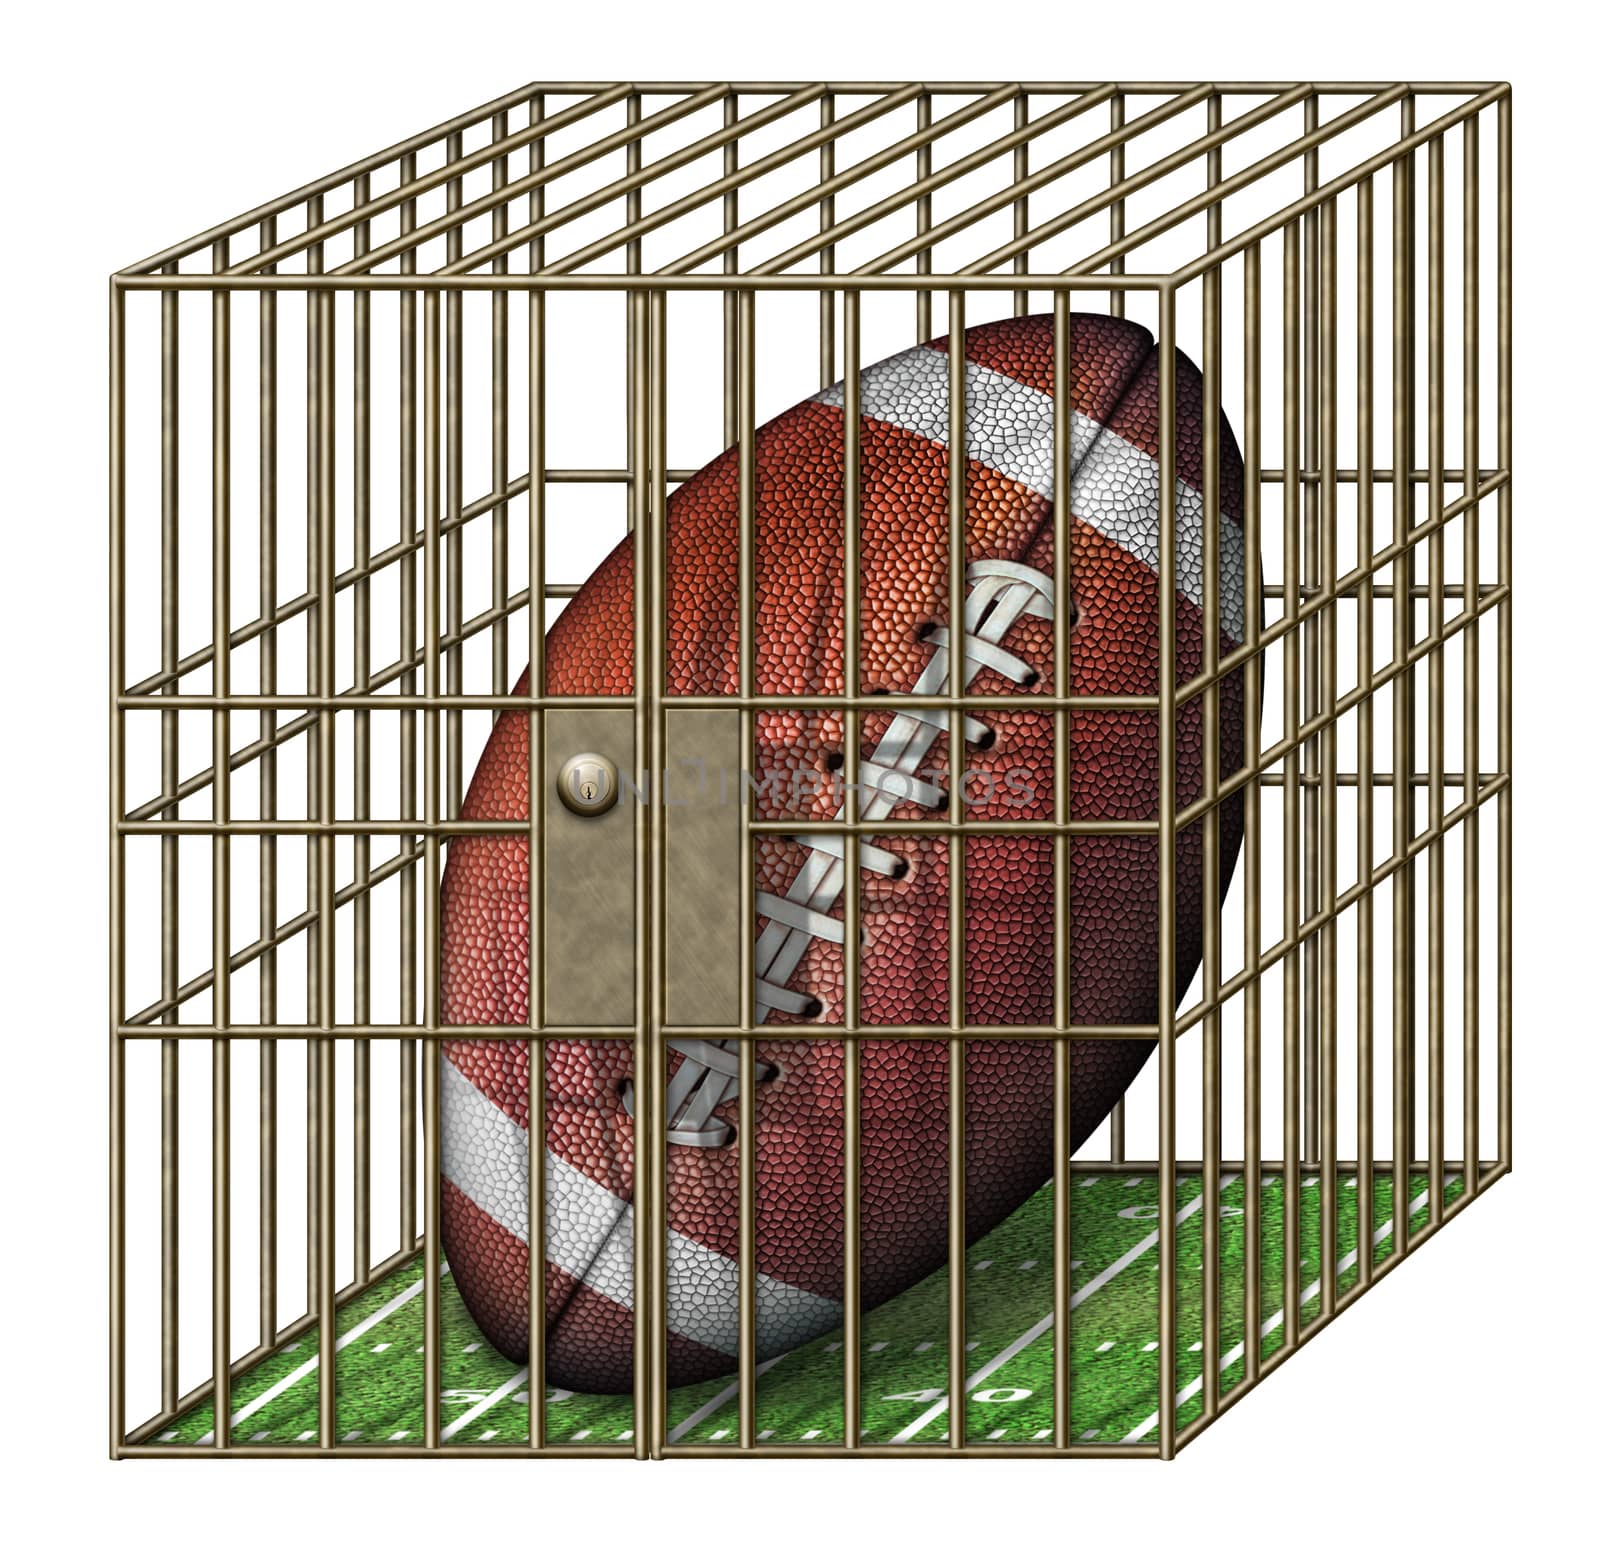 Digital illustration of a football in a jail cell.